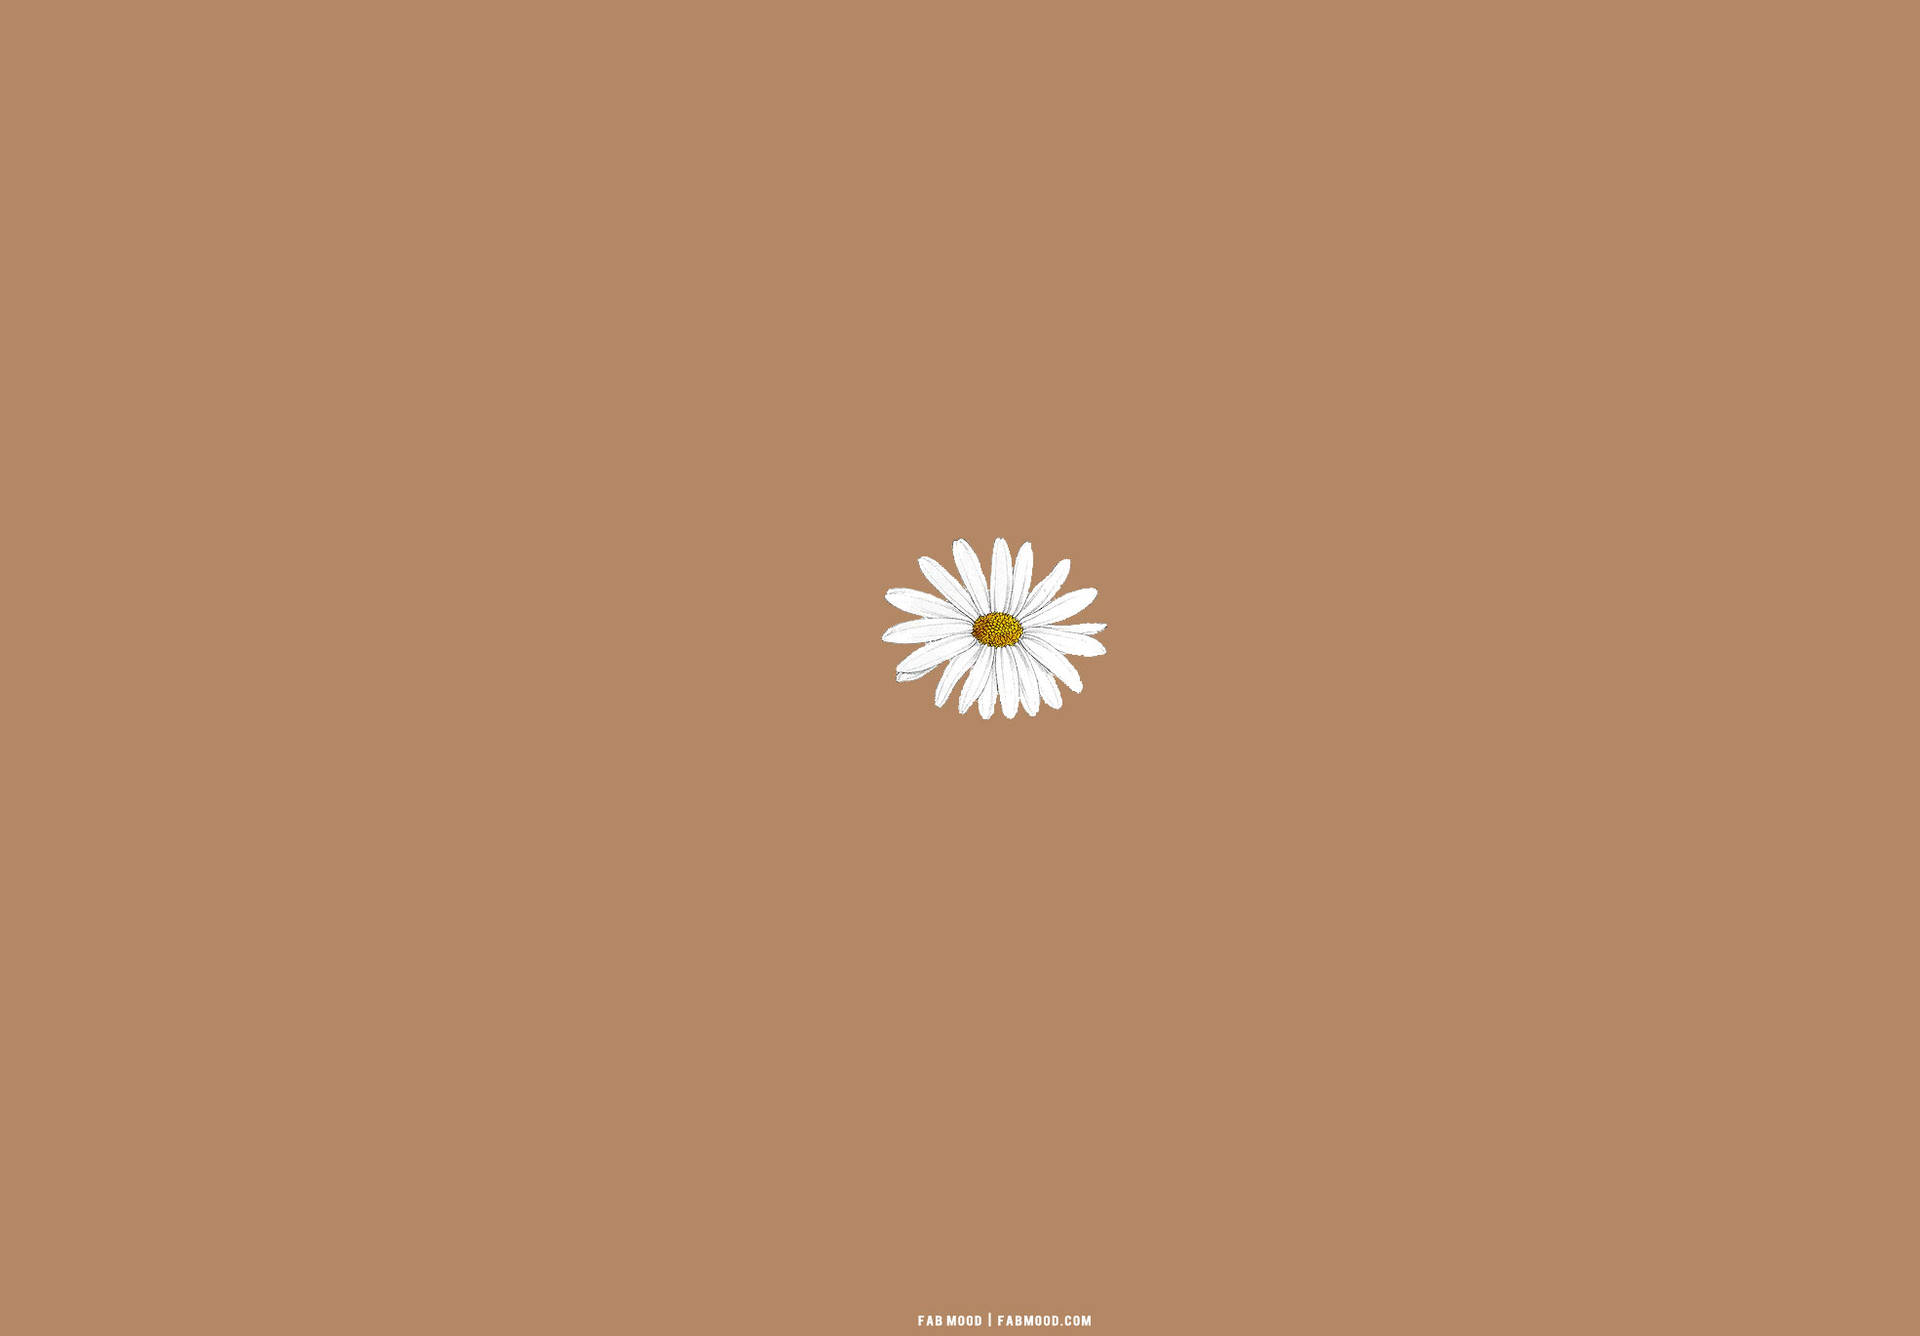 White Daisy On Beige Brown Aesthetic